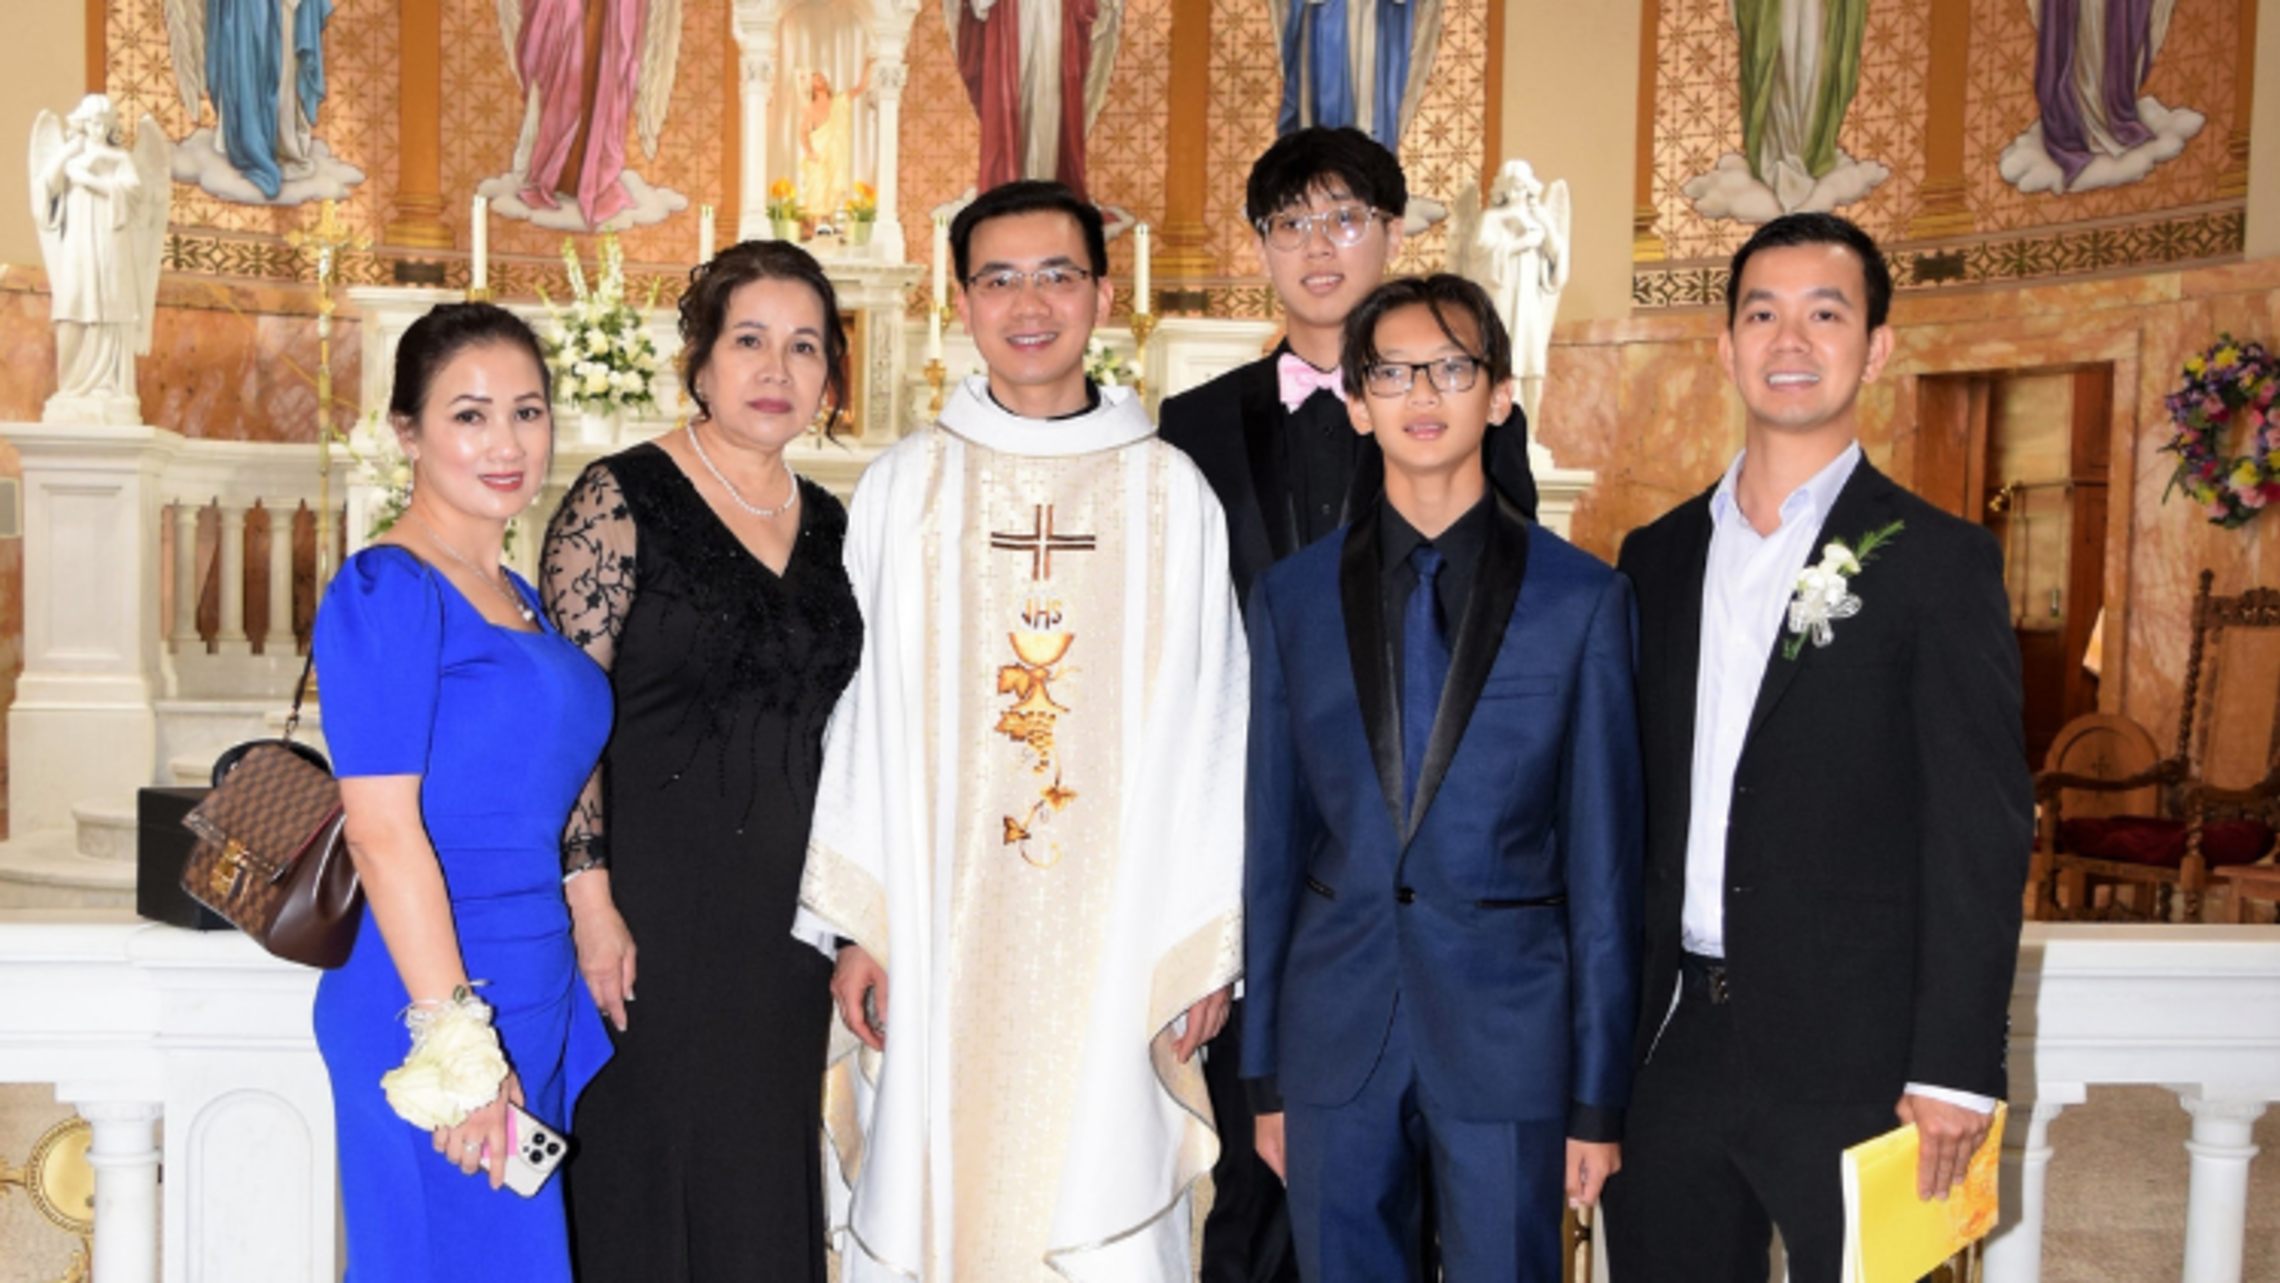 Newly ordained Fr. Ky Nguyen, SDB, and his family